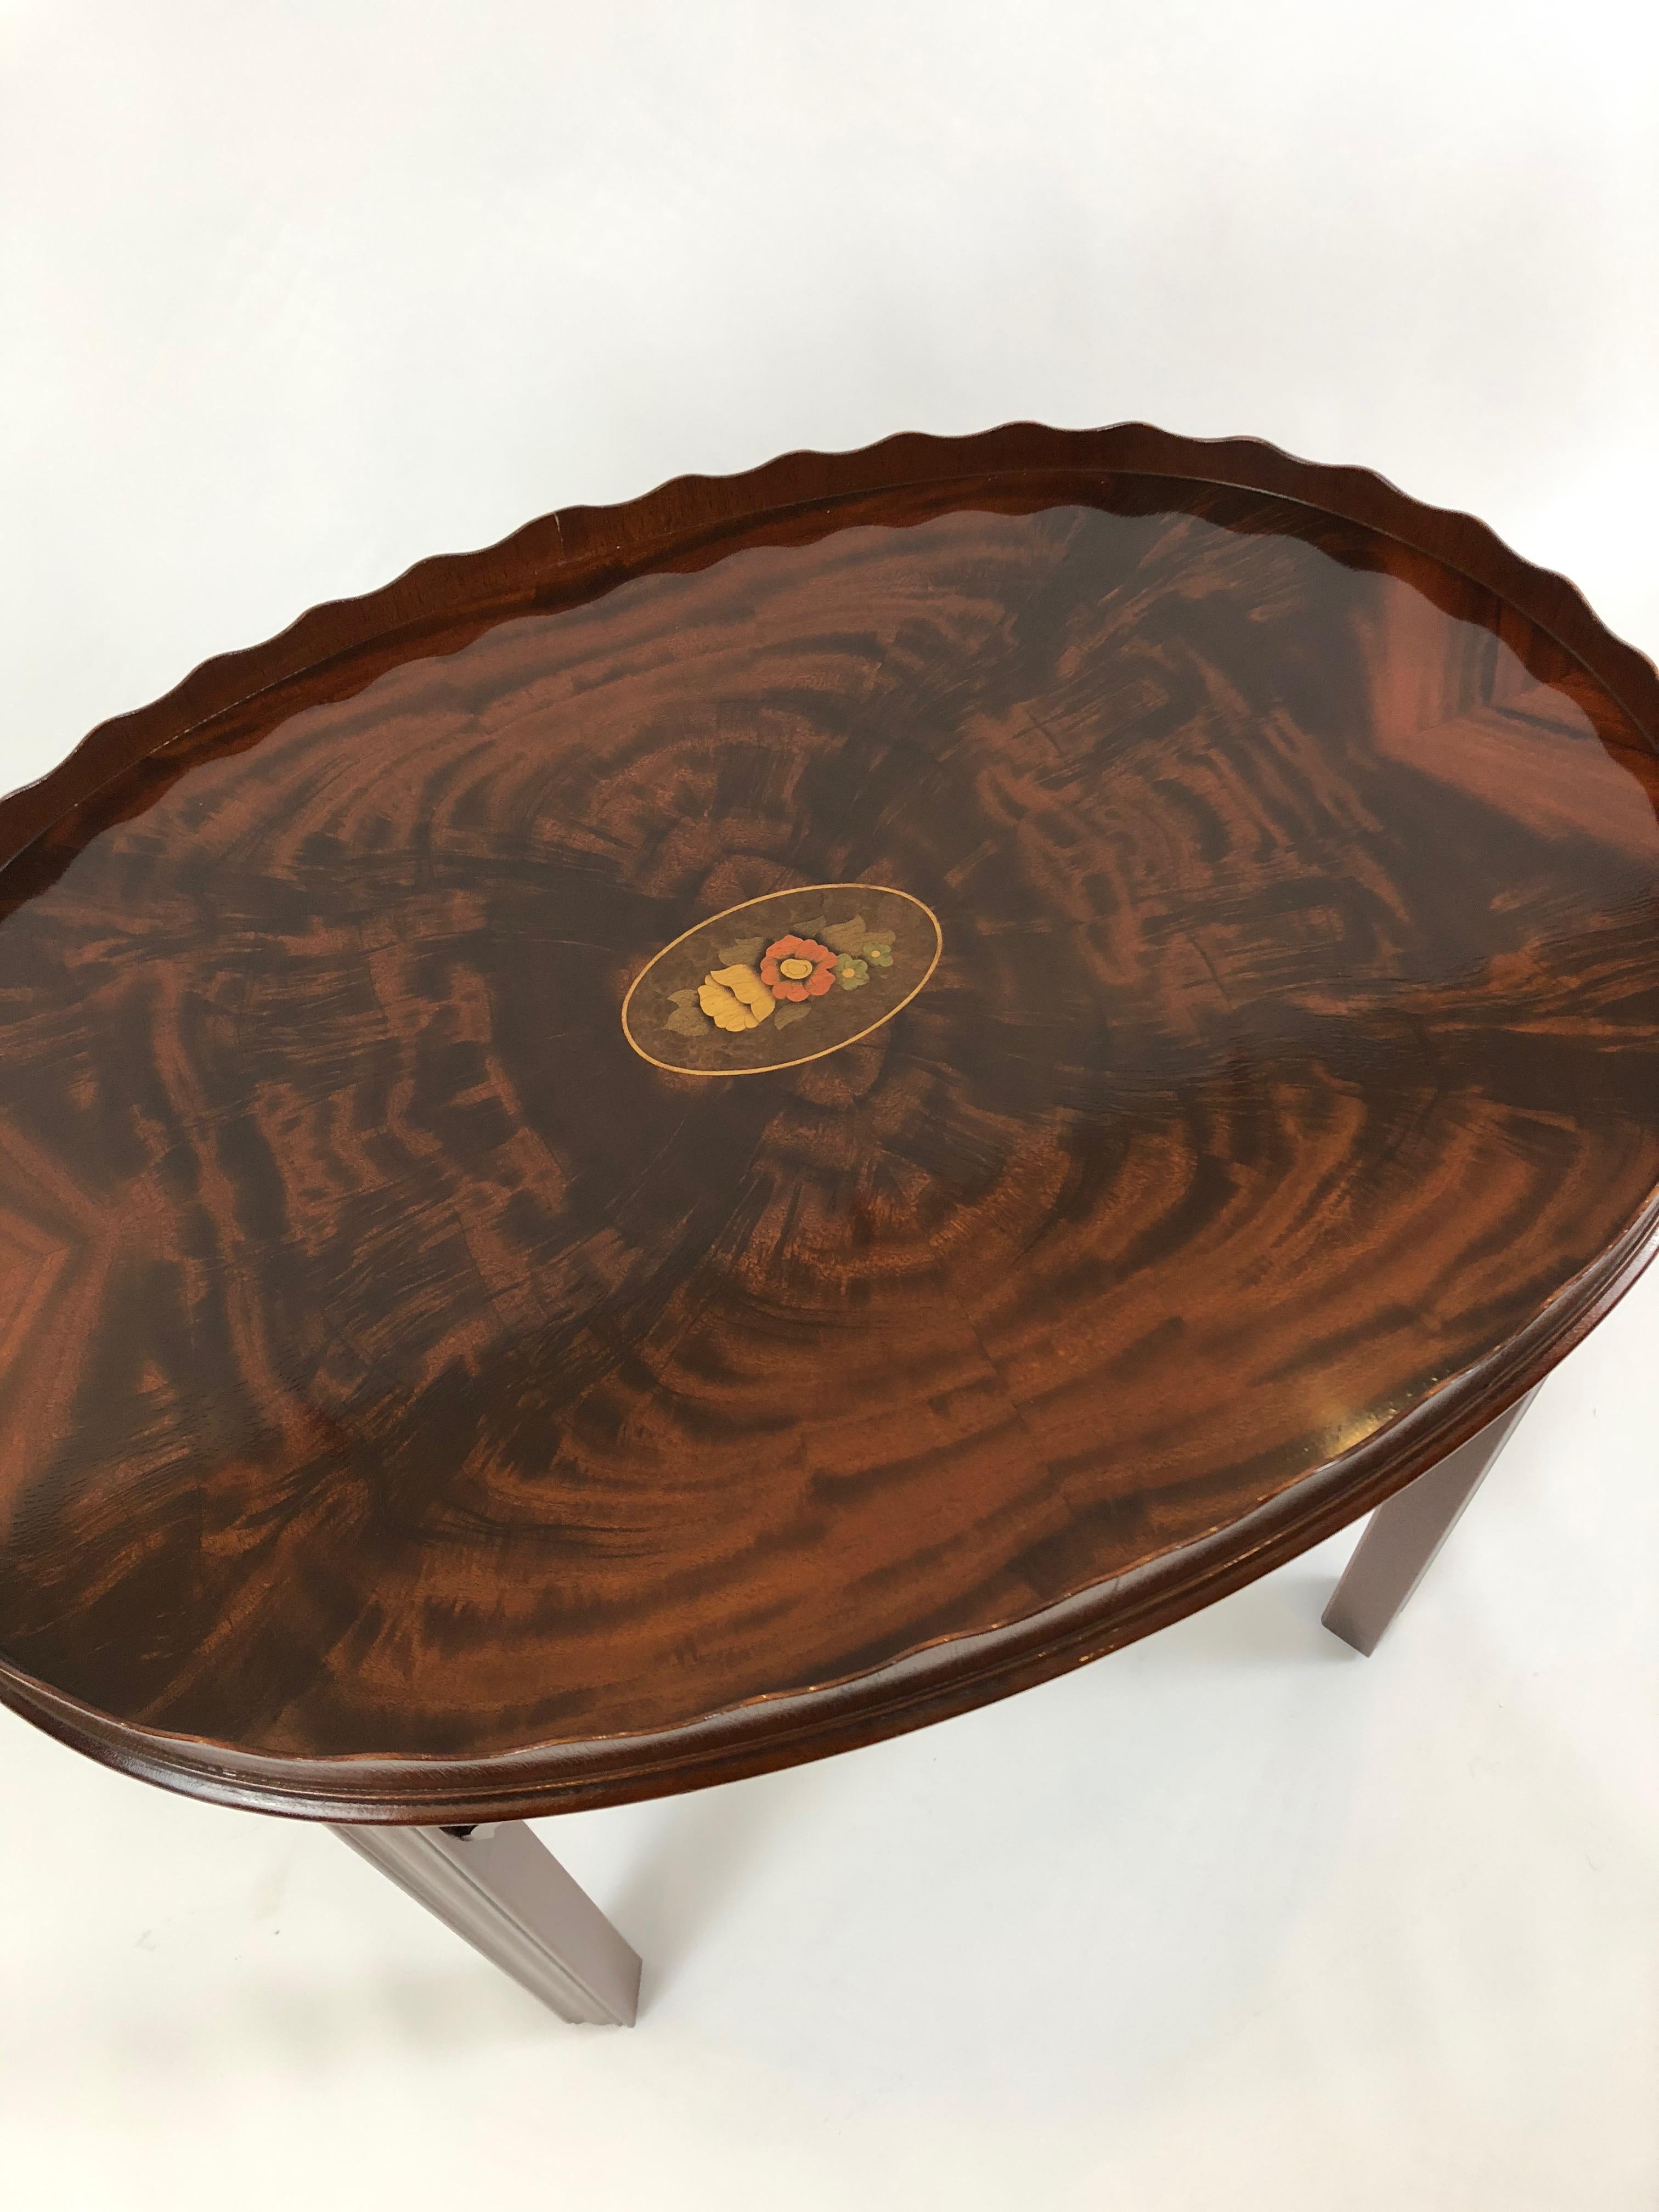 Exquisite oval cocktail table having beautifully bookmatched lively flame mahogany top with pretty inlaid floral central medallion, elegant scalloped wood edge, and refined carved wood legs.